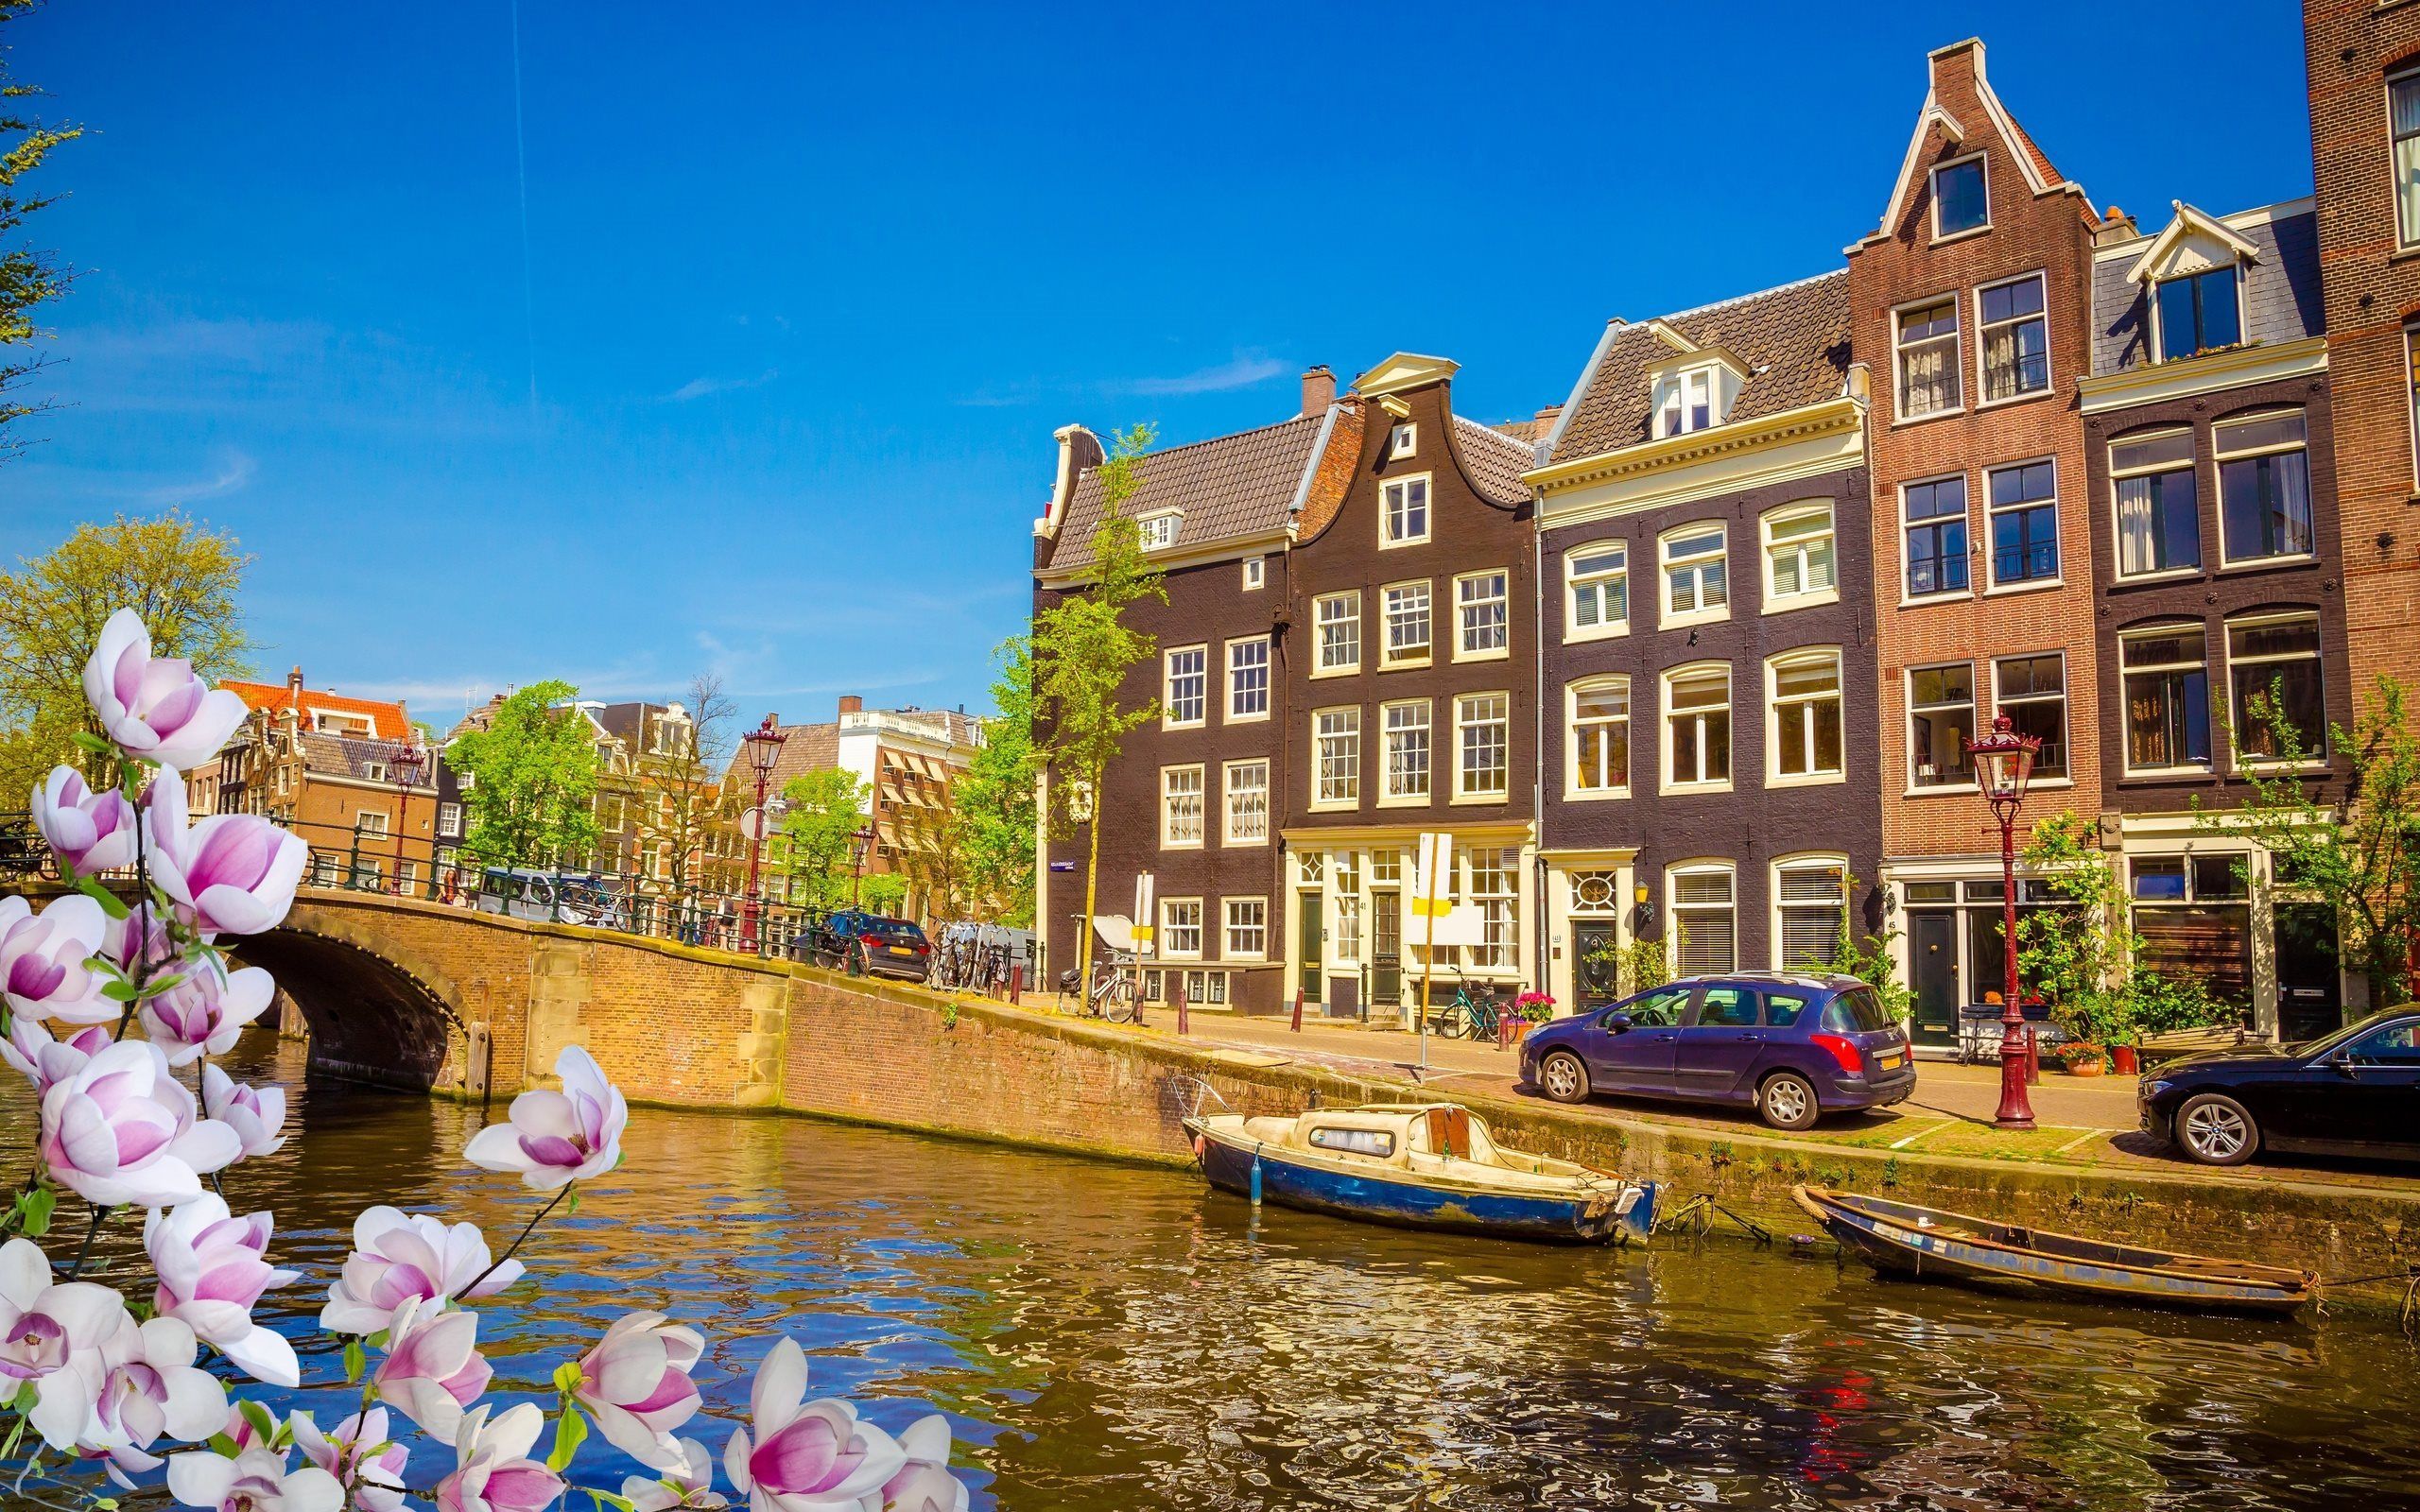 Download wallpaper Netherlands, Amsterdam, spring, bridge, HDR for desktop with resolution 2560x1600. High Quality HD picture wallpaper